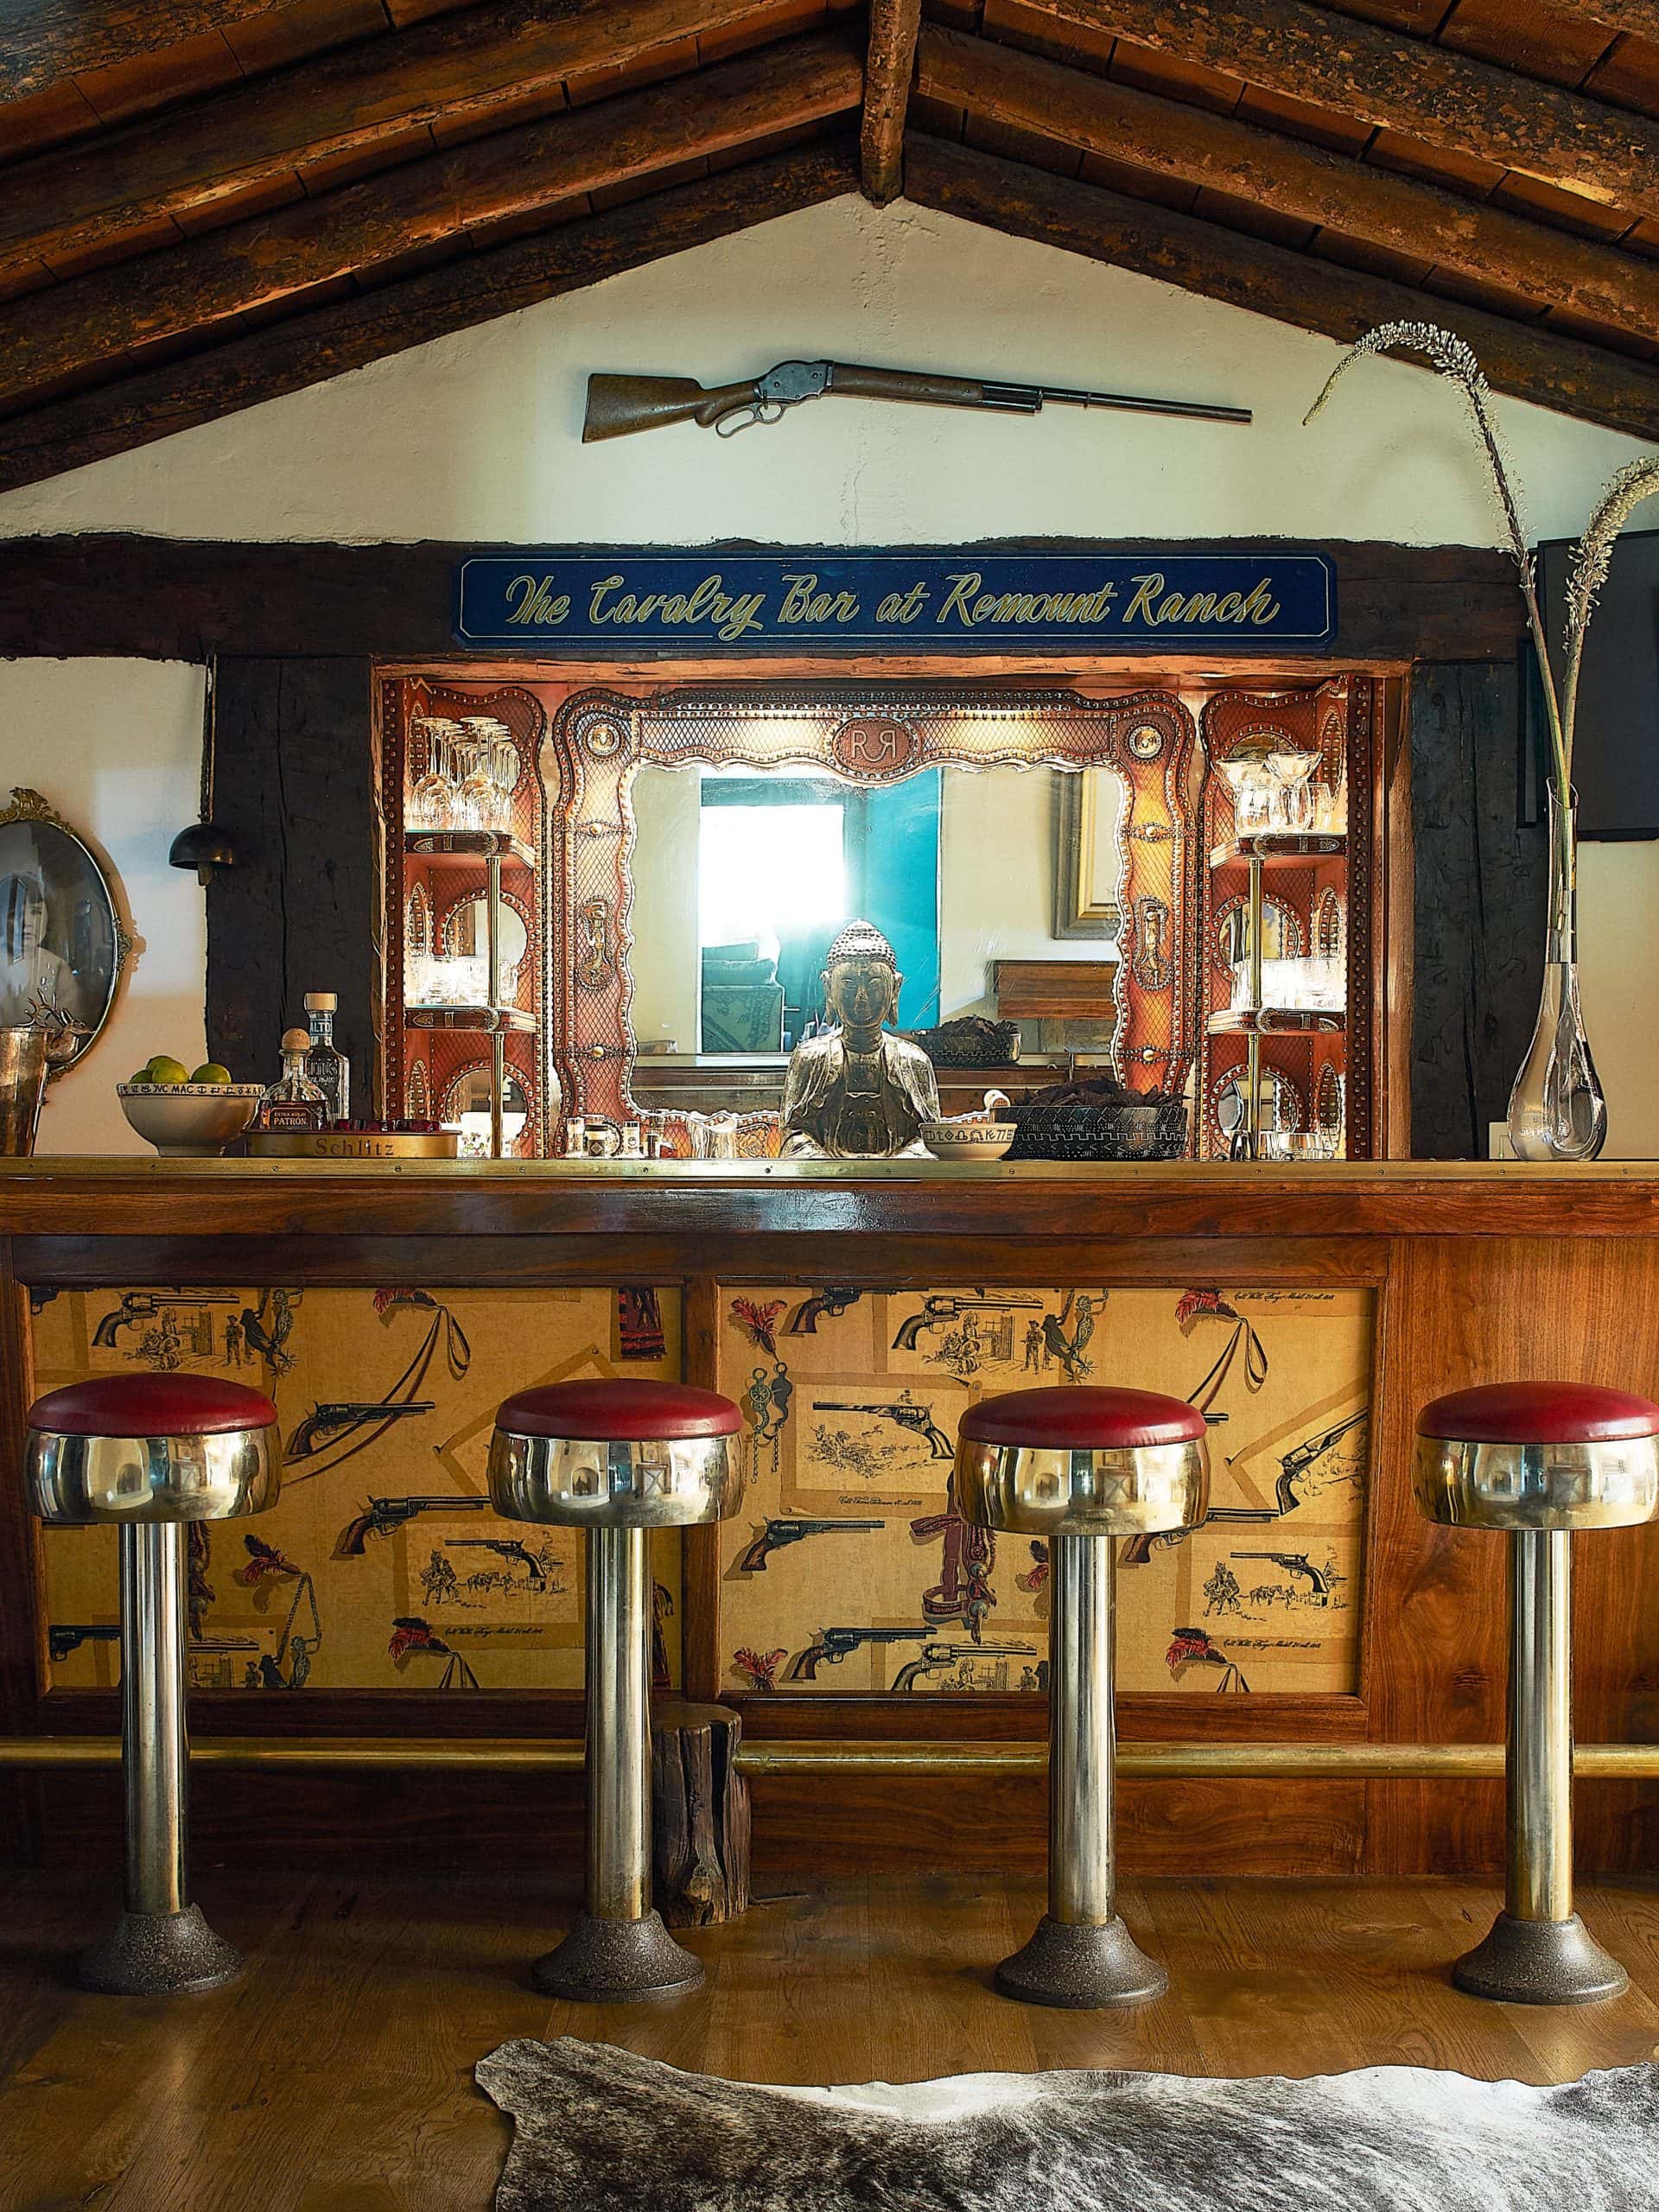 Original bar at Remount Ranch from when it was originally a dude ranch.